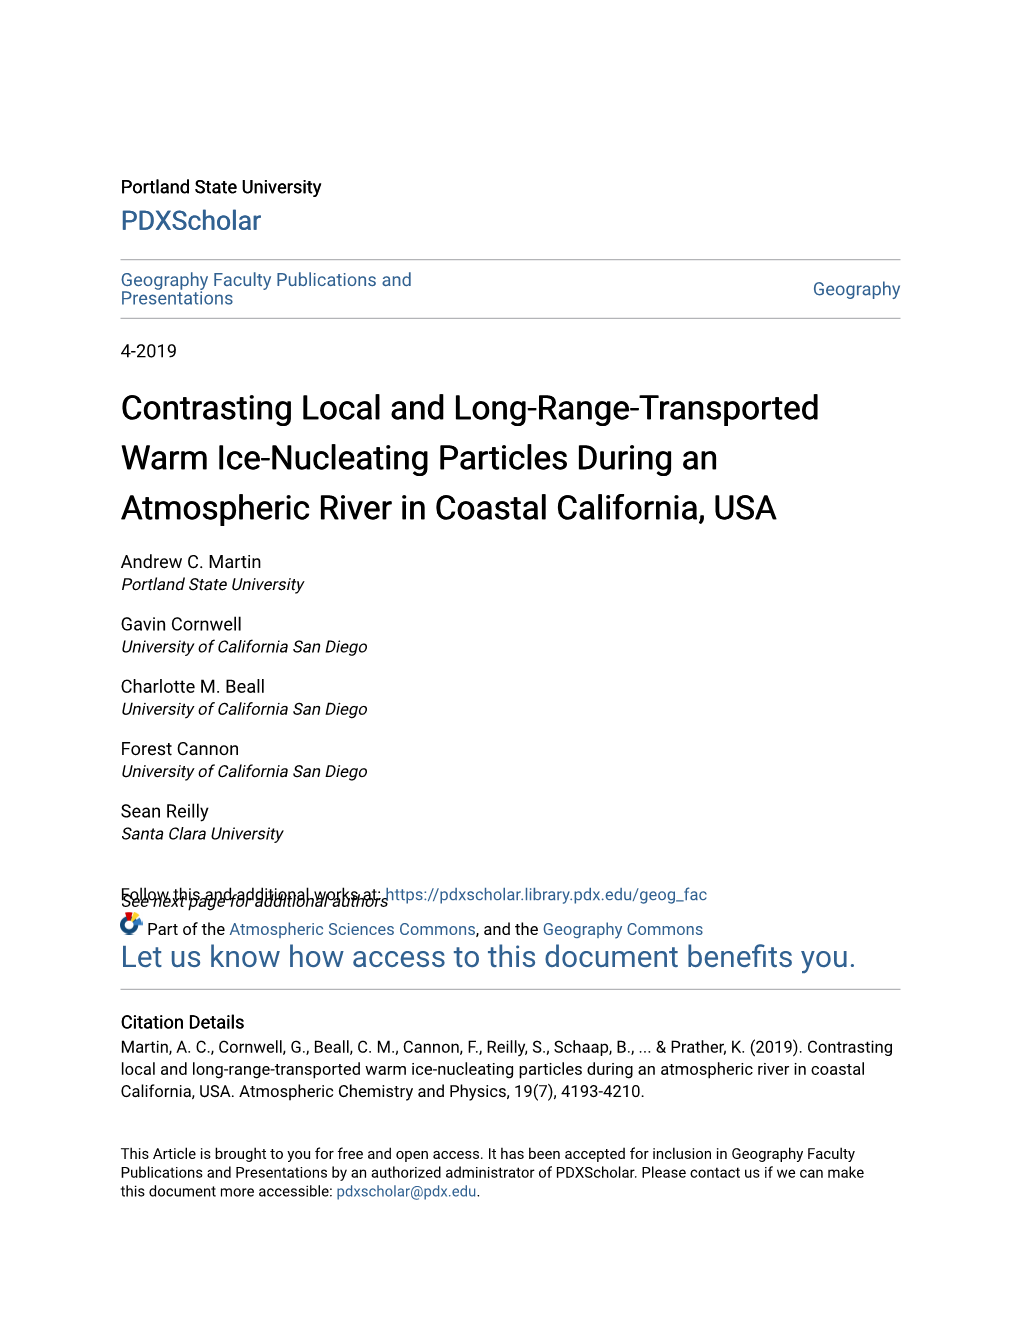 Contrasting Local and Long-Range-Transported Warm Ice-Nucleating Particles During an Atmospheric River in Coastal California, USA